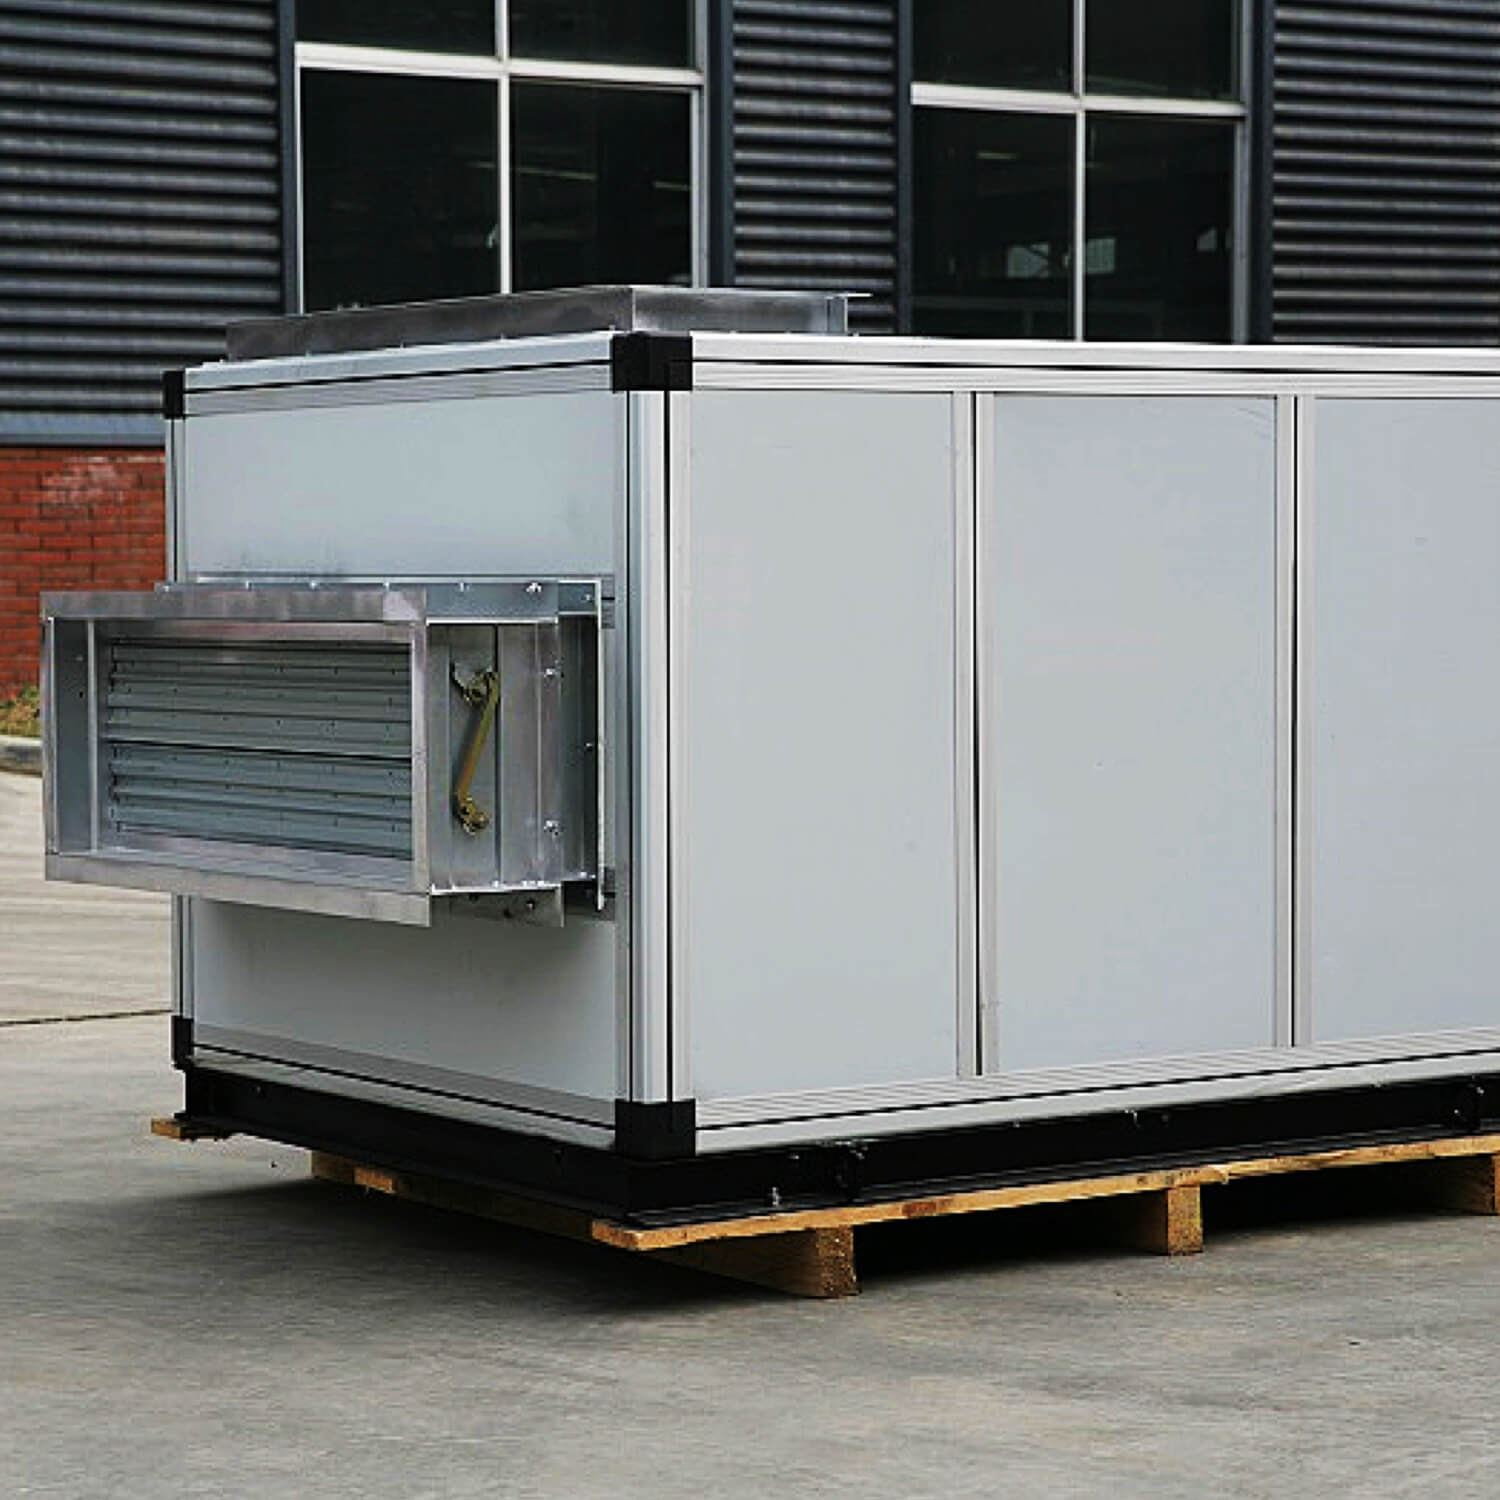 HVAC System Manufacture Combined air handling unit